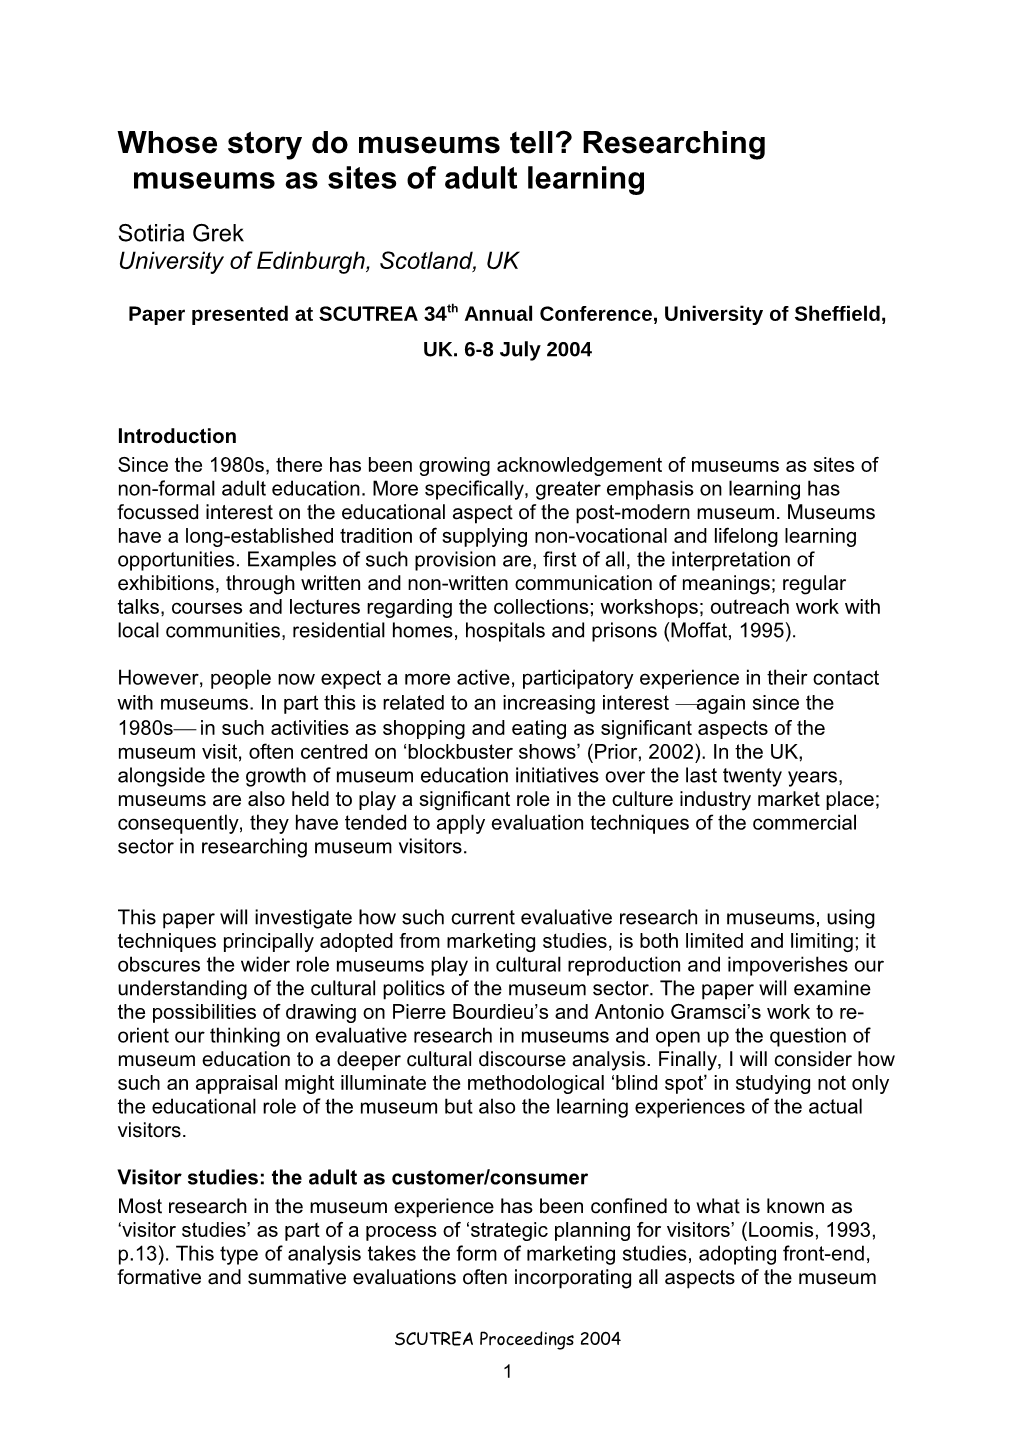 Paper Presented at SCUTREA 34Th Annual Conference, University of Sheffield, UK s1